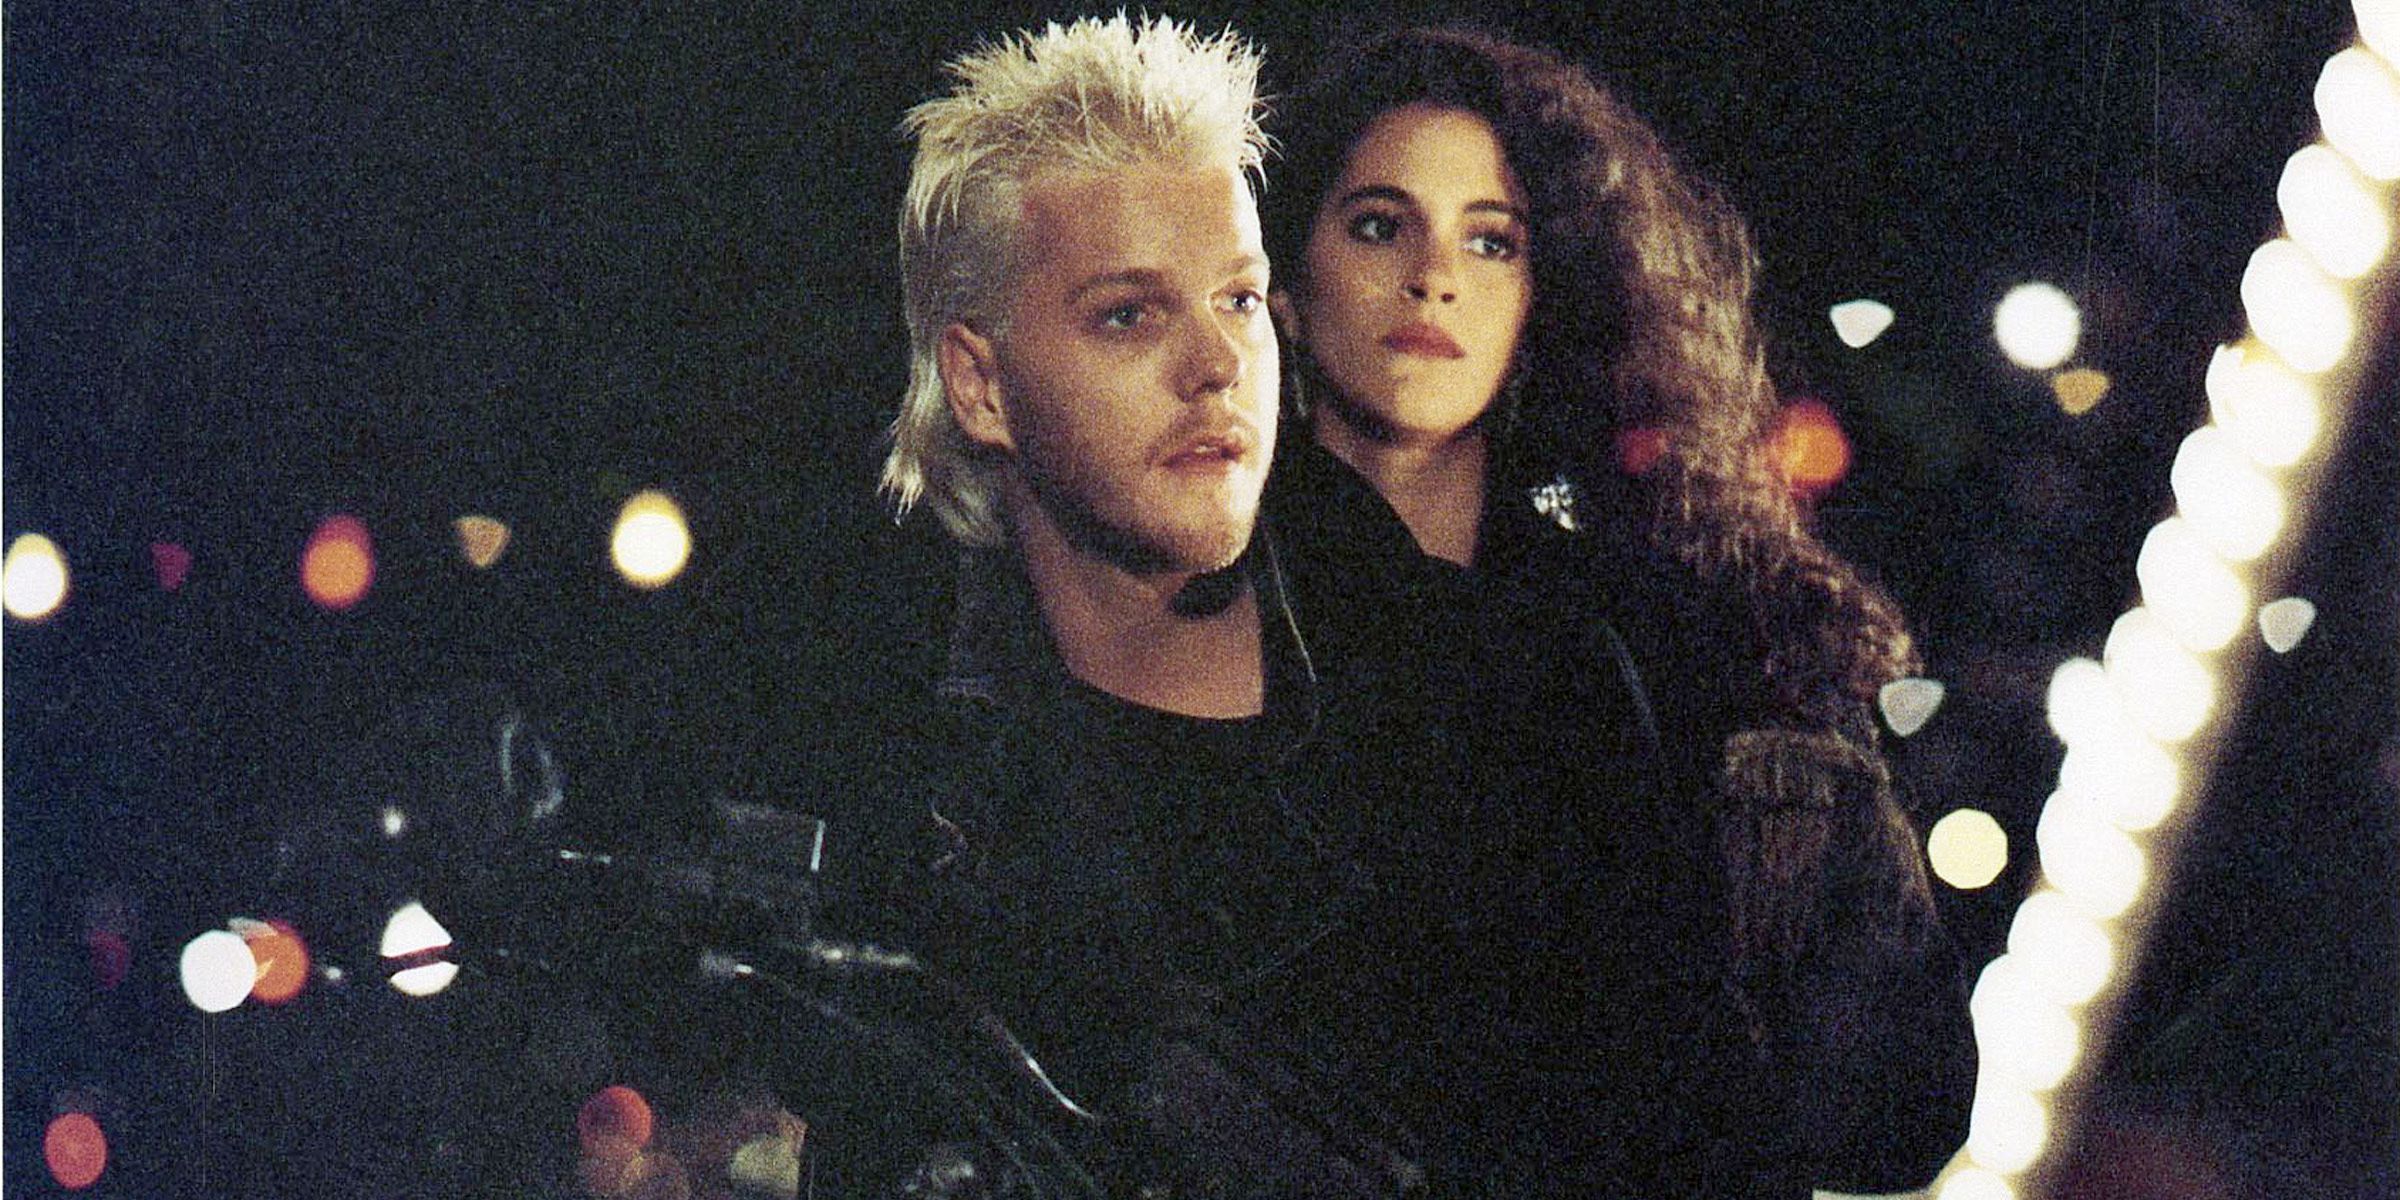 Kiefer and Jami on a bike in The Lost Boys.